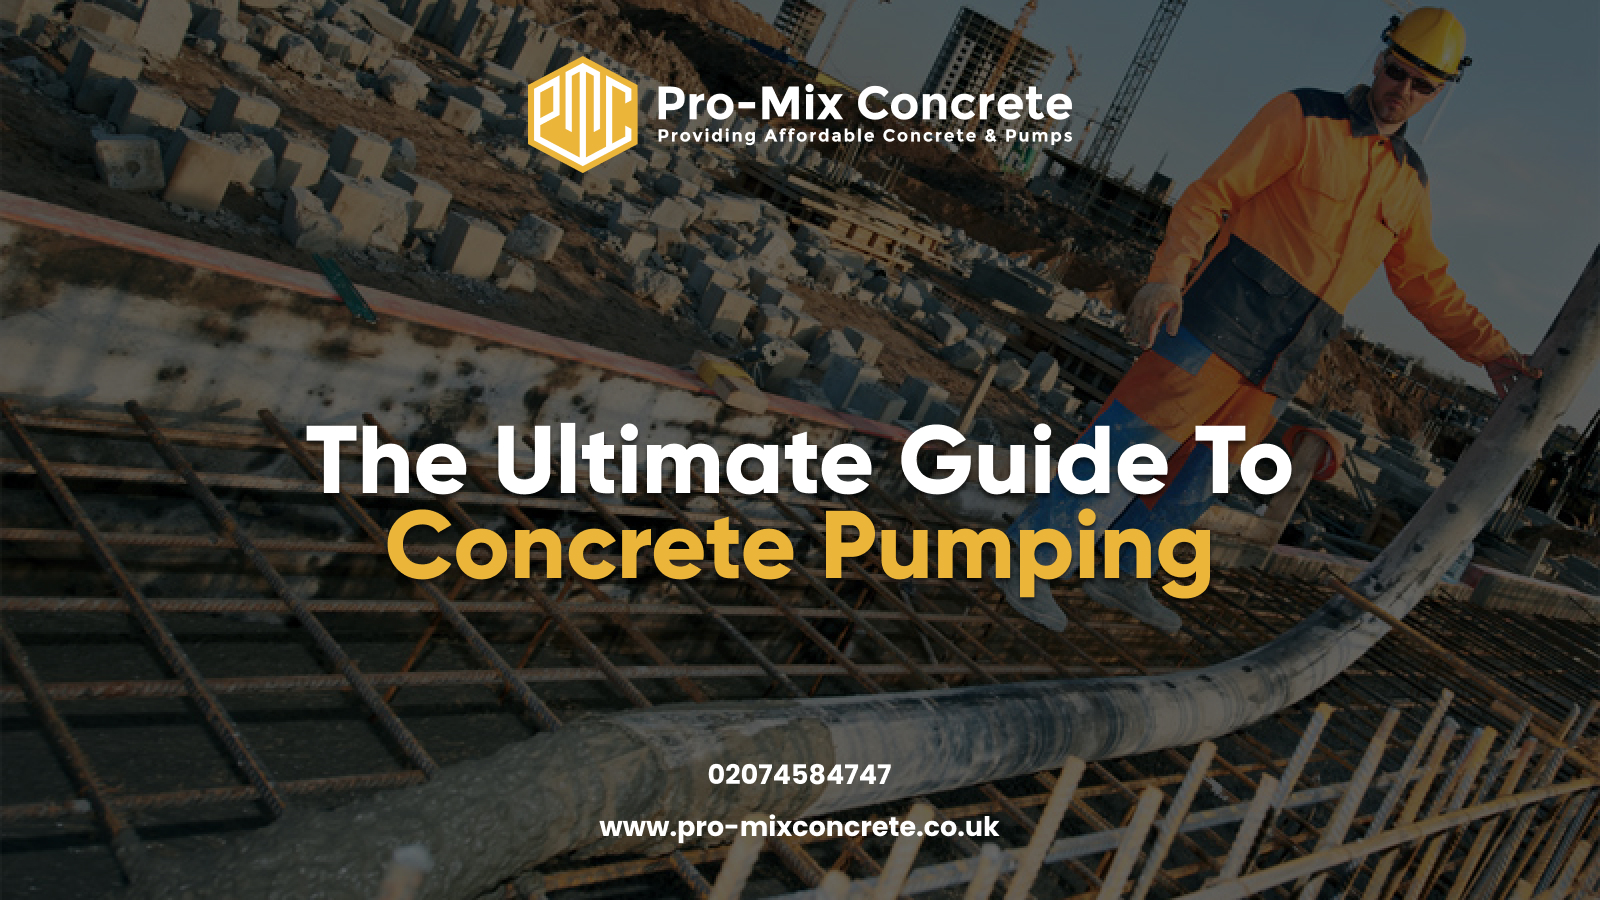 The Ultimate Guide To Concrete Pumping